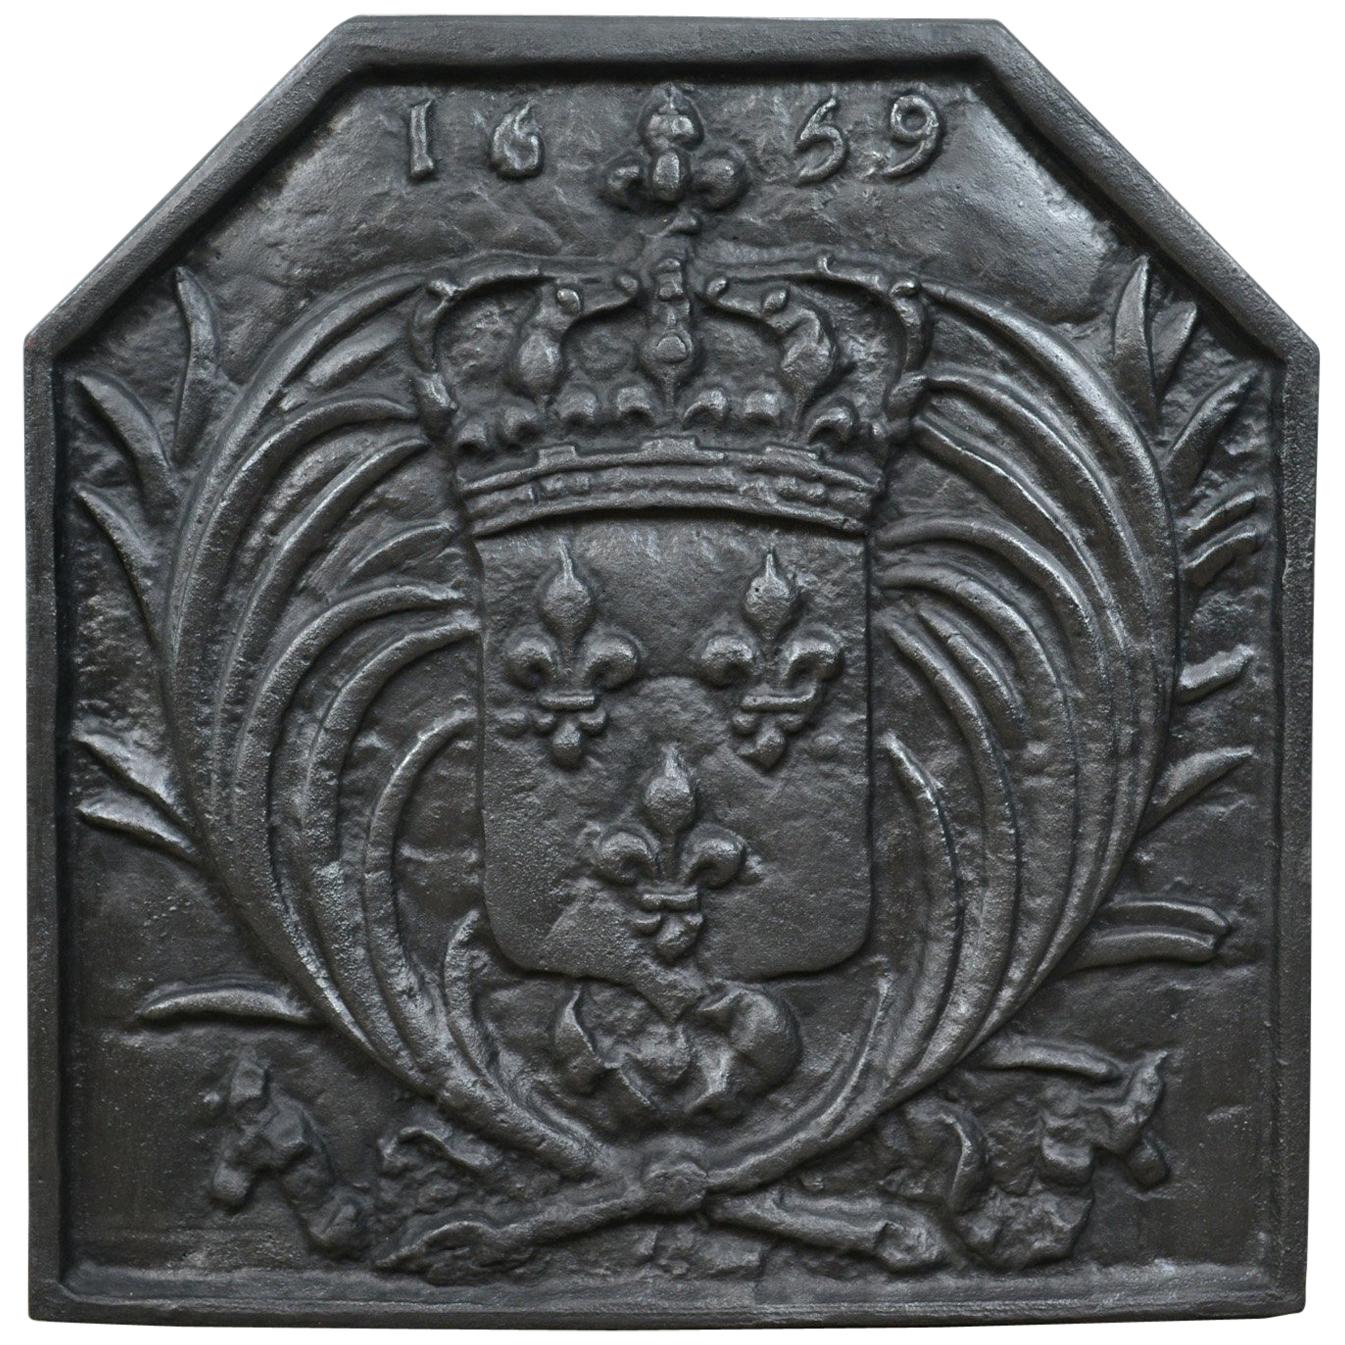 Antique Cast Iron Fire Back, Coat of Arms, Fireplace Revival Casting, circa 1900